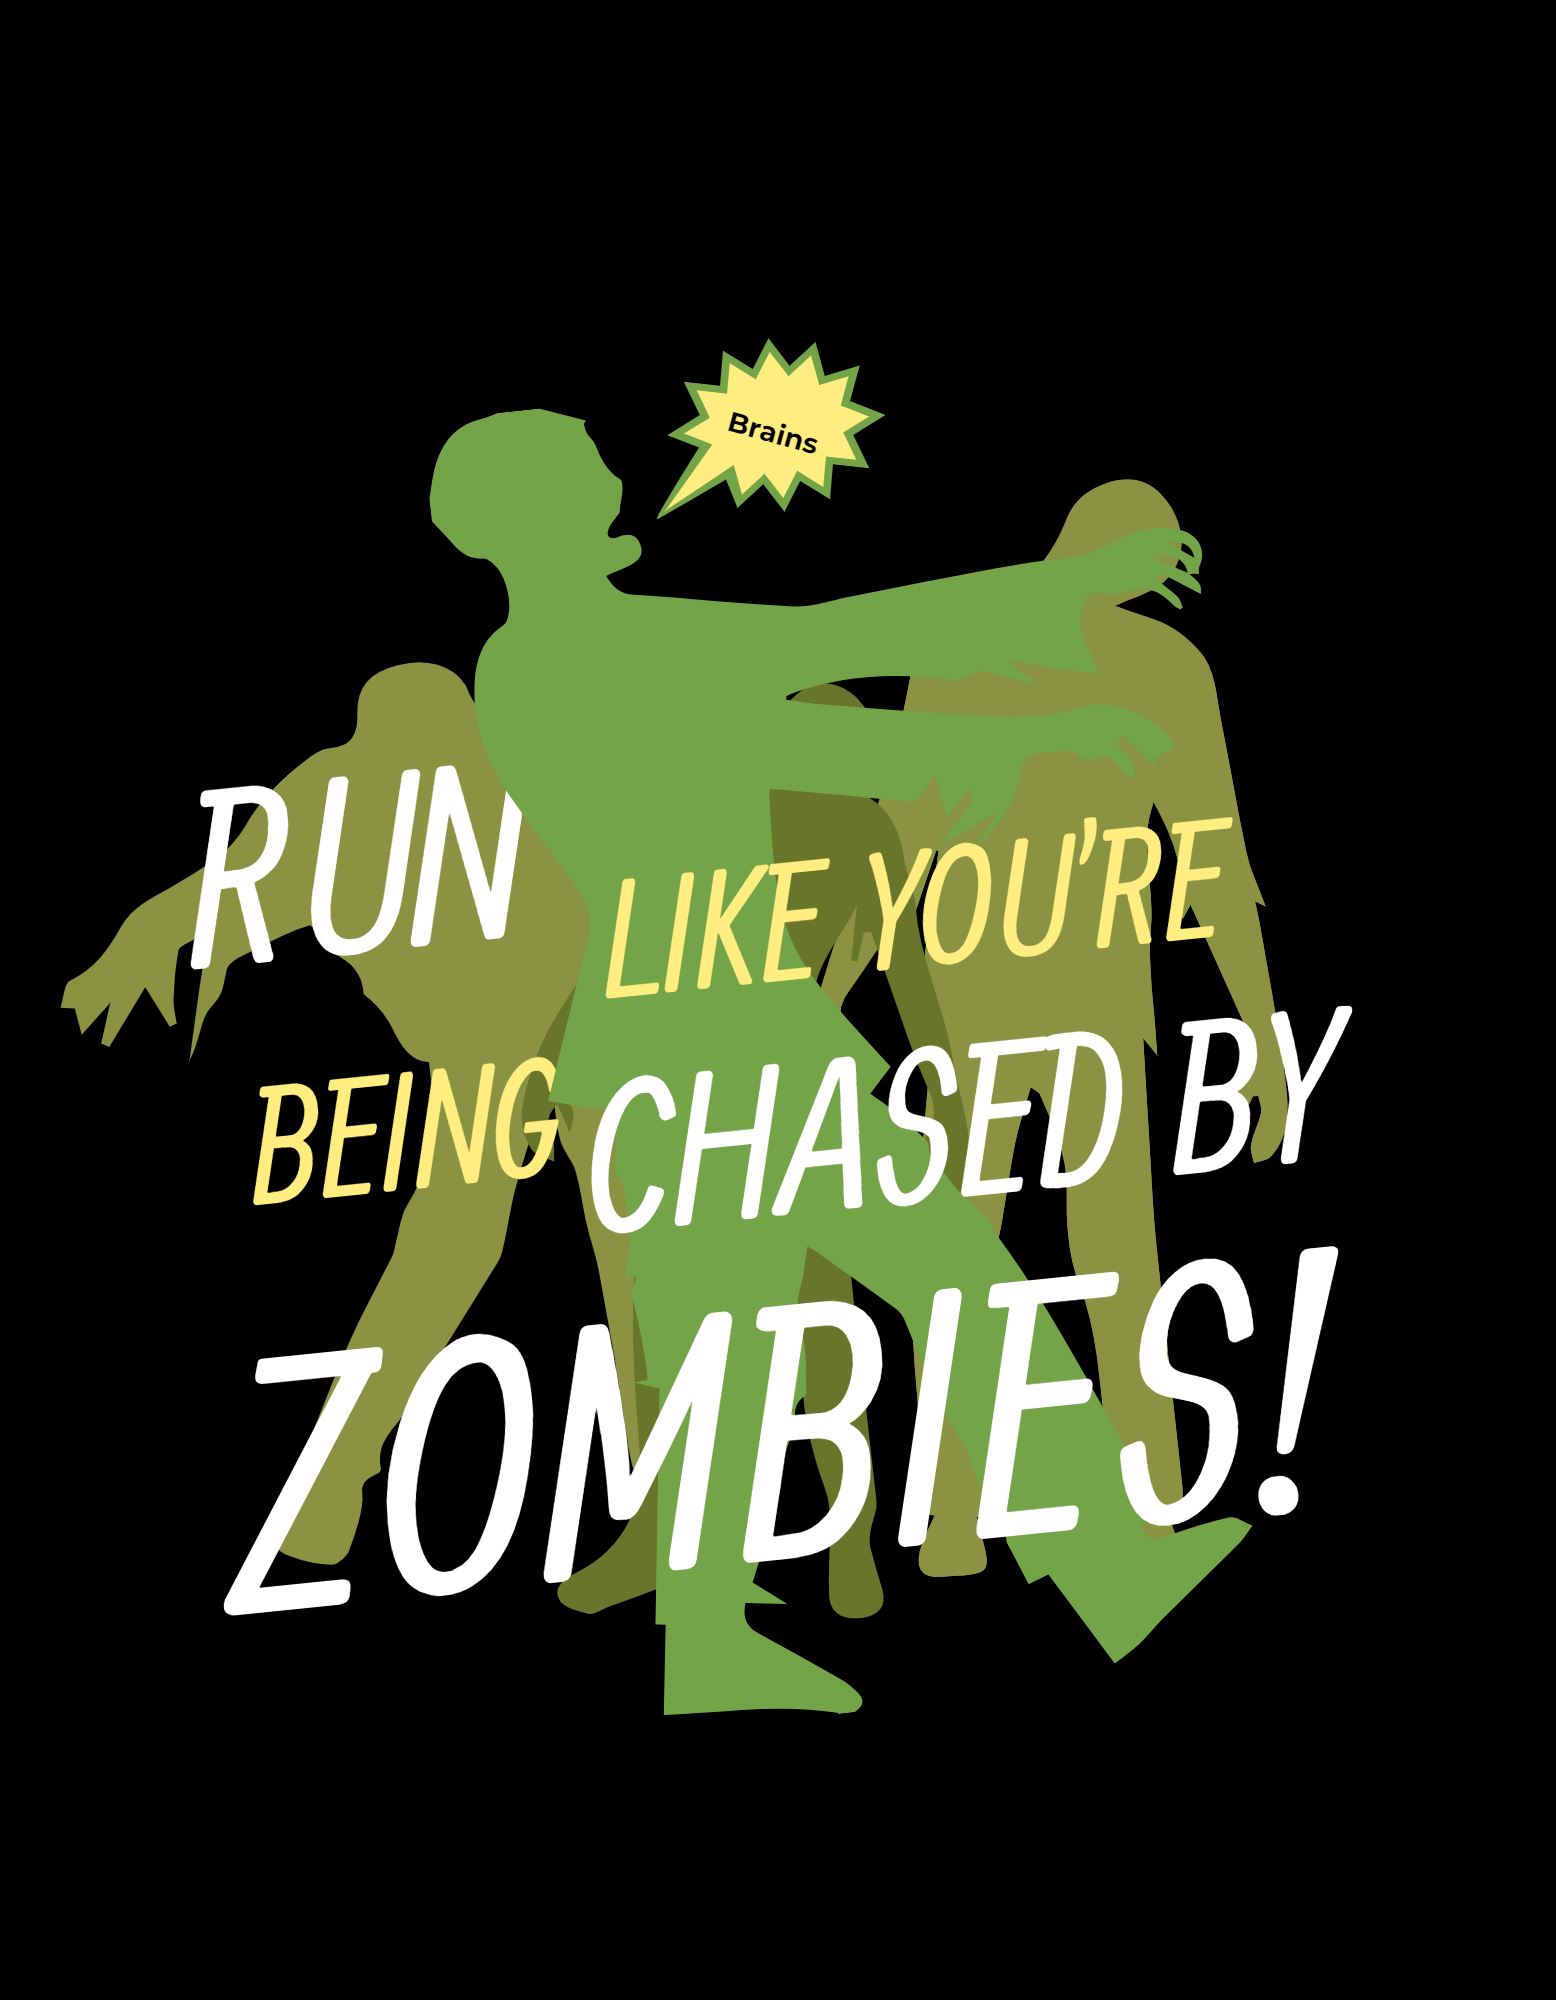 What's the first thing you should do if the zombie apocalypse broke out today?